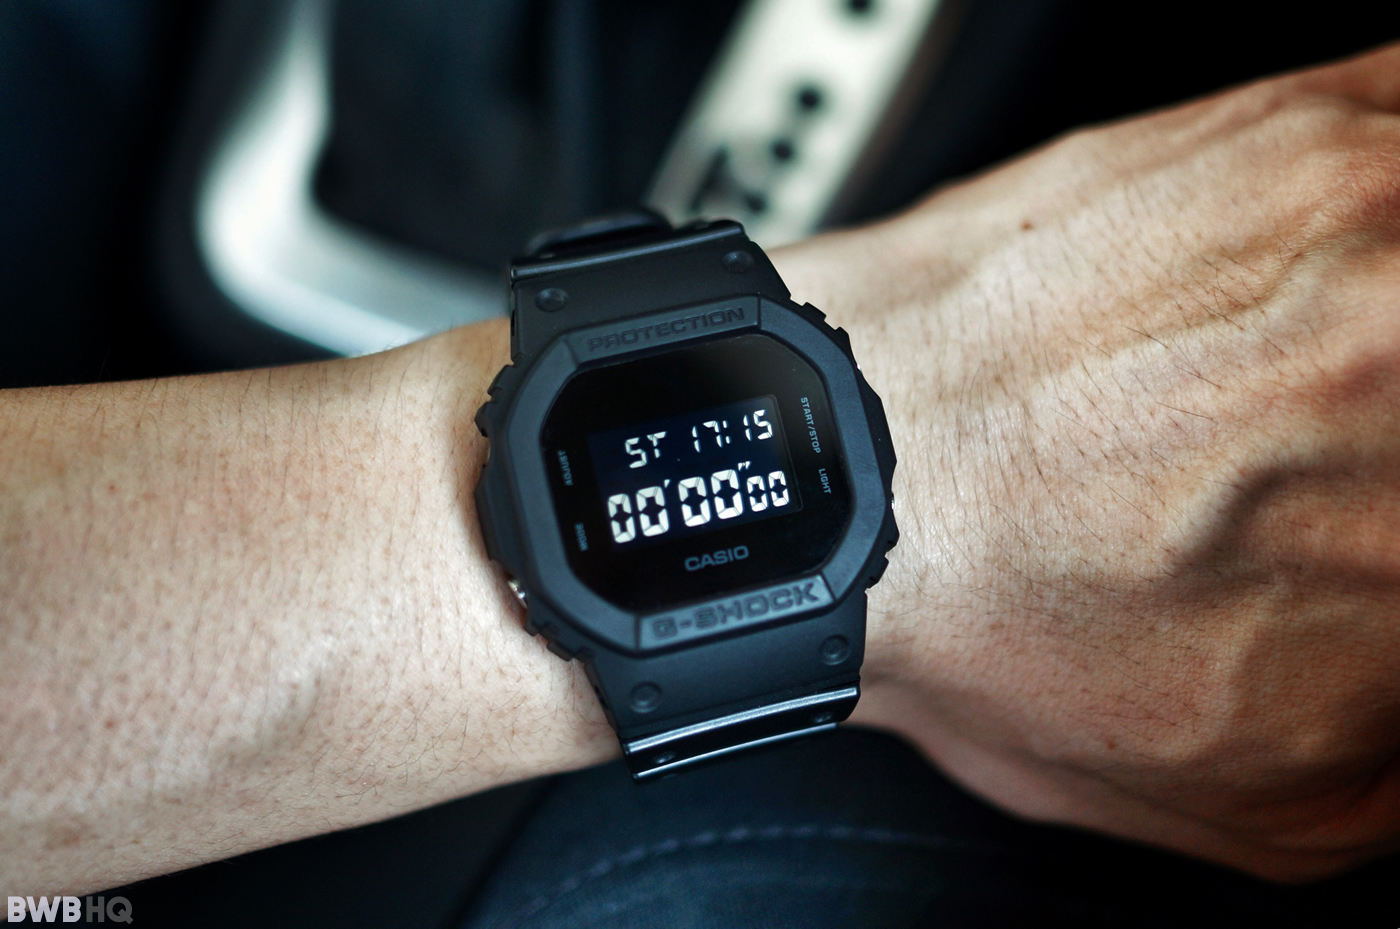 casio dw 5600bb review